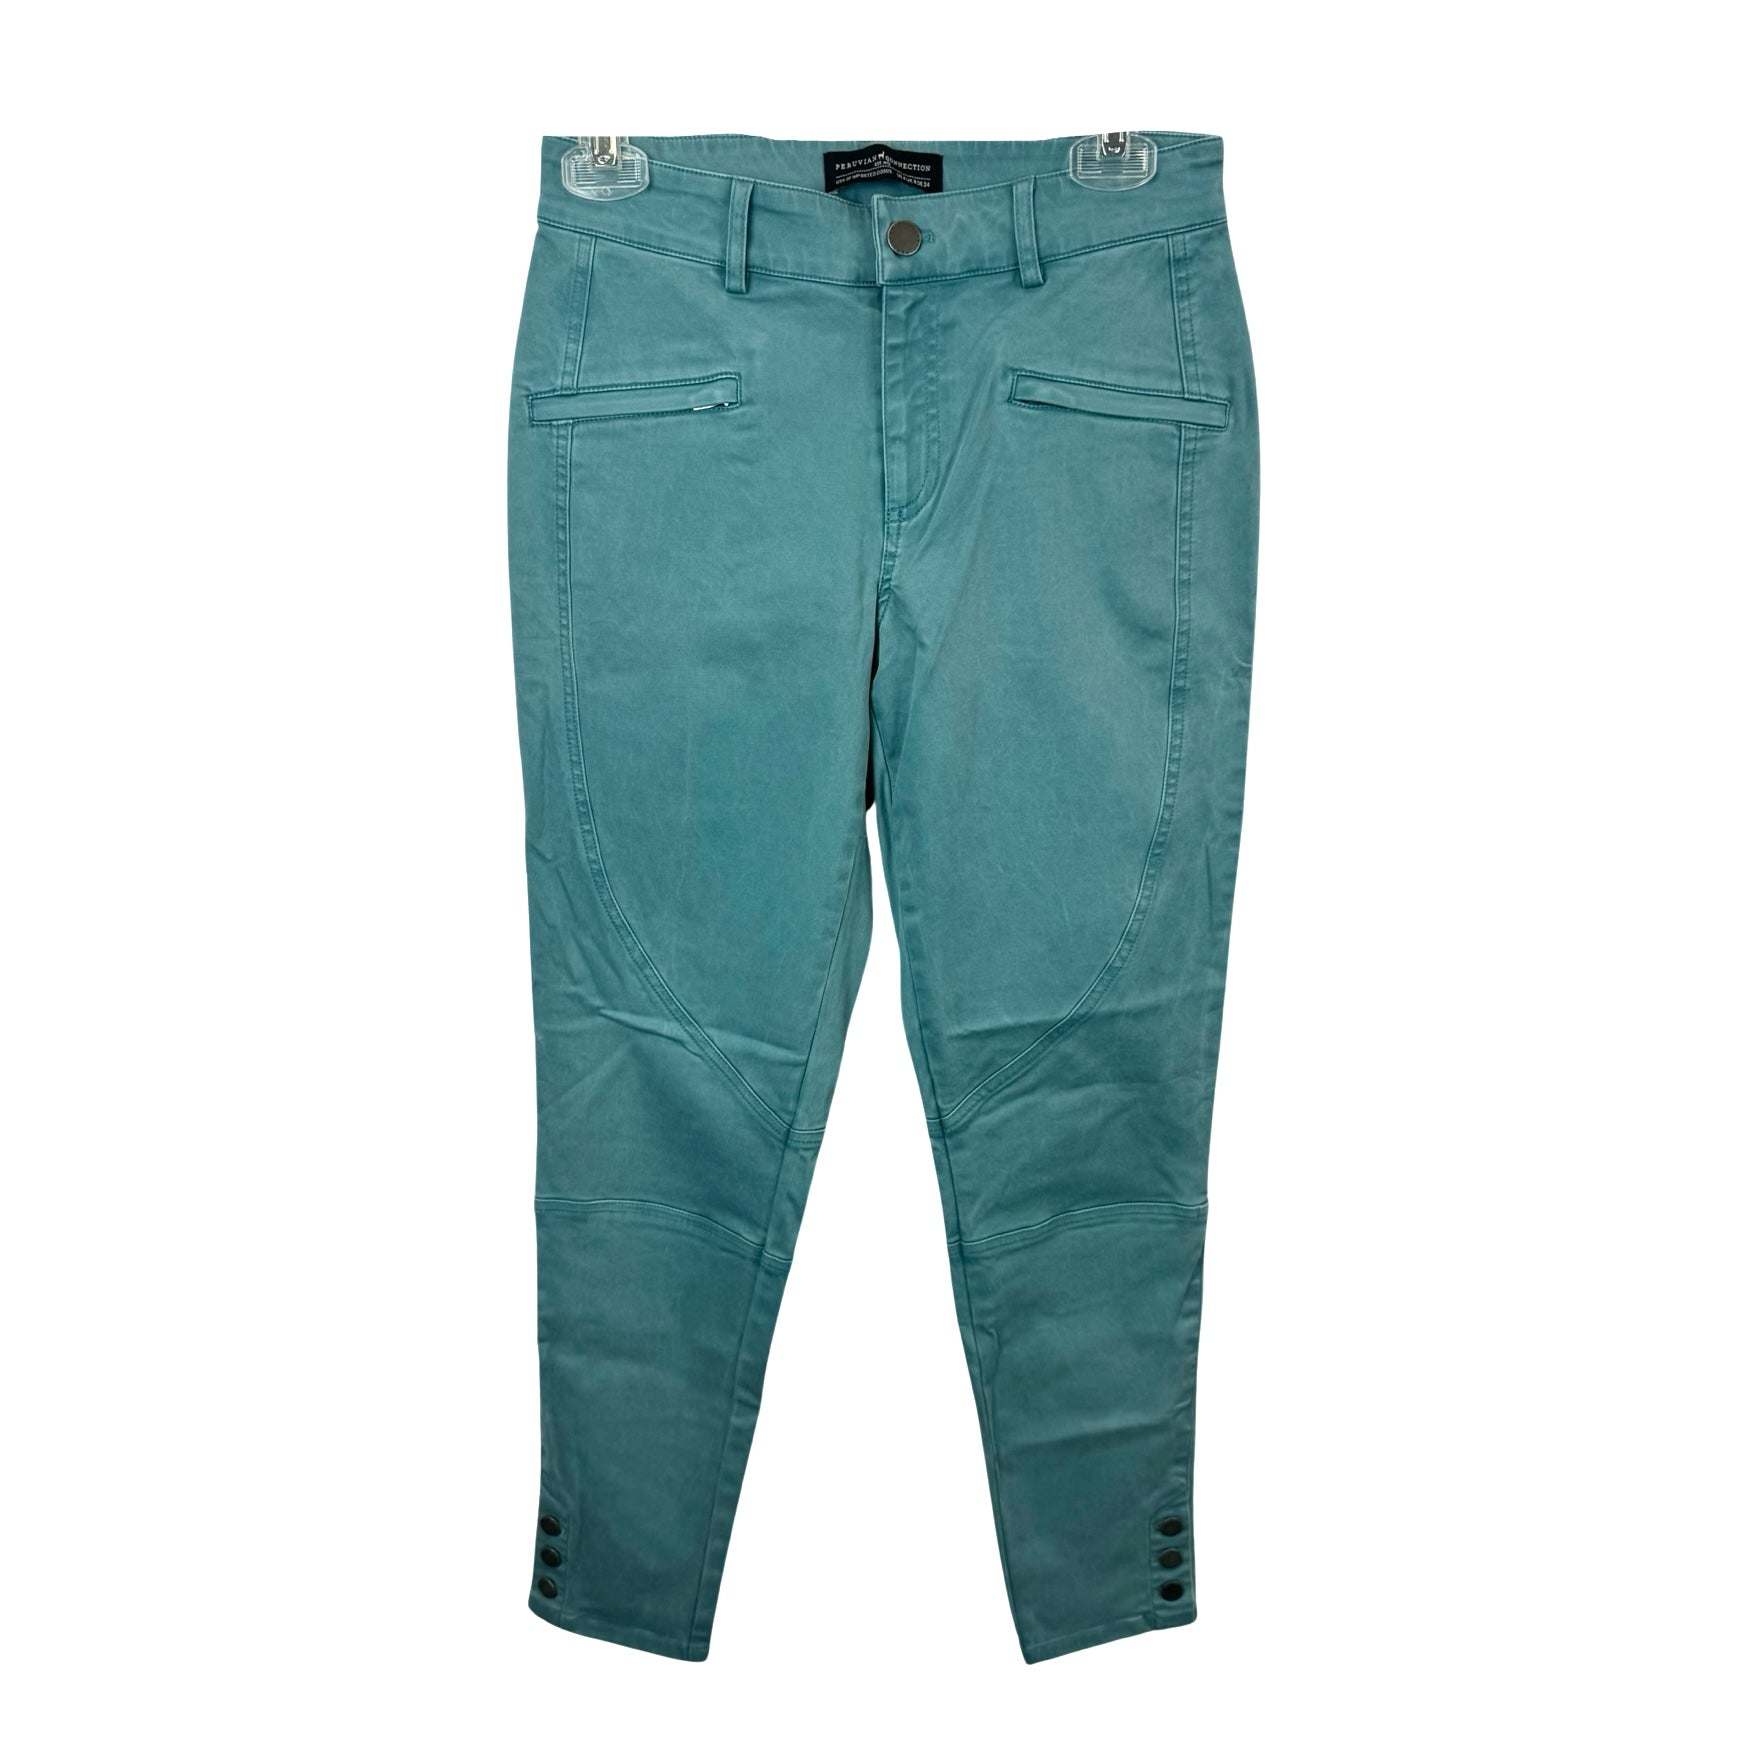 Peruvian Connection Blue Ryder Pant